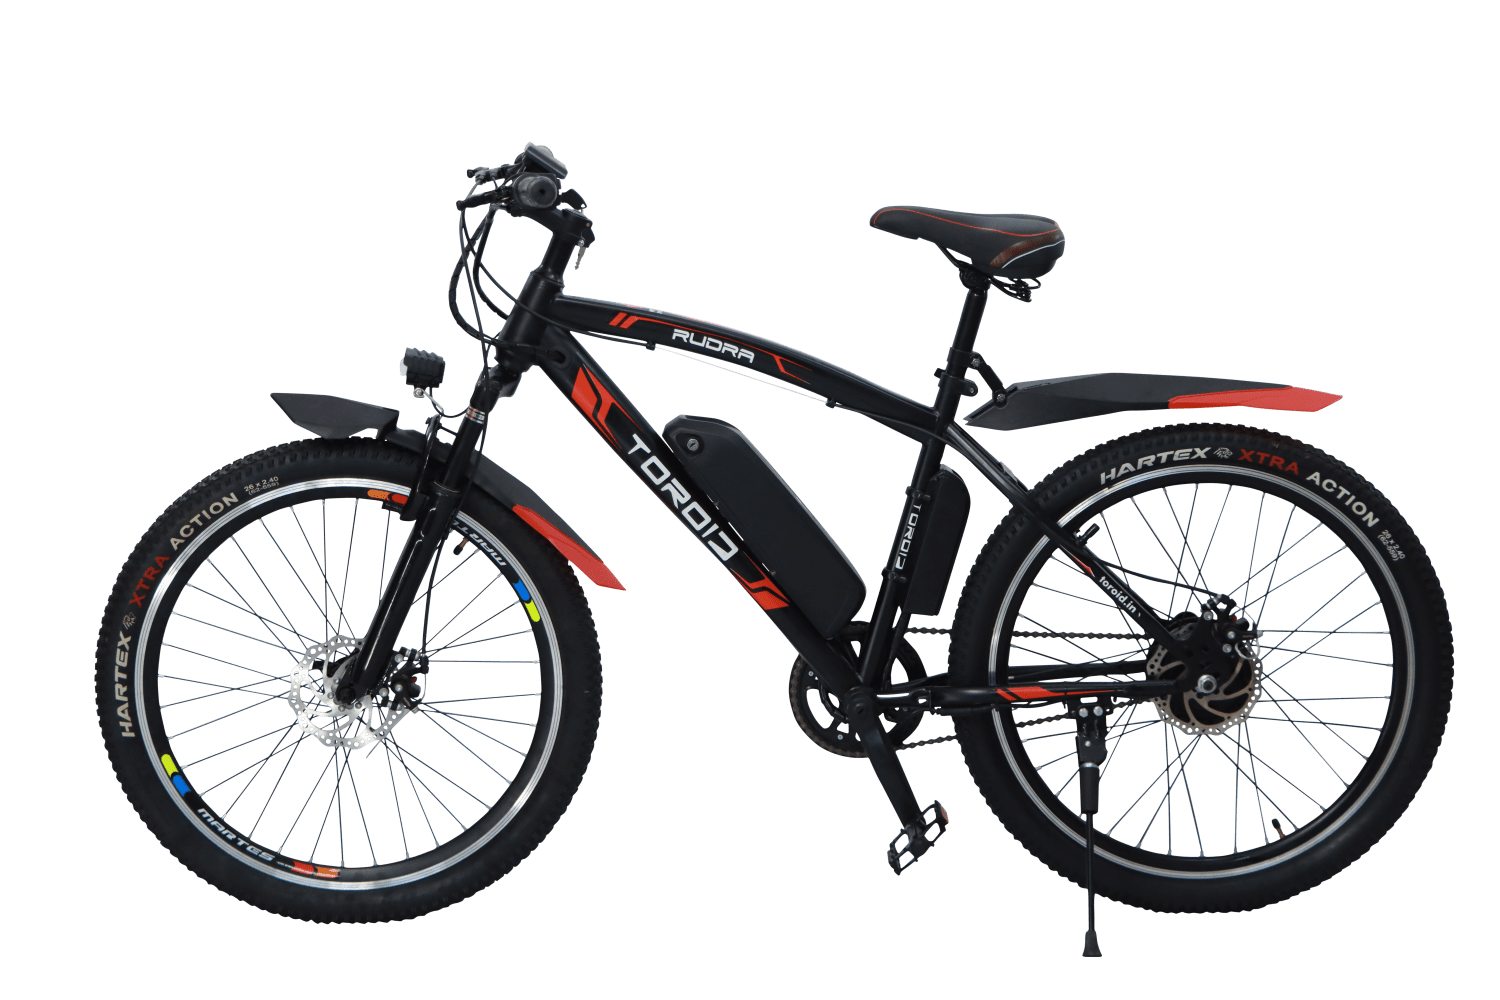 Rudra Electric cycle on sale